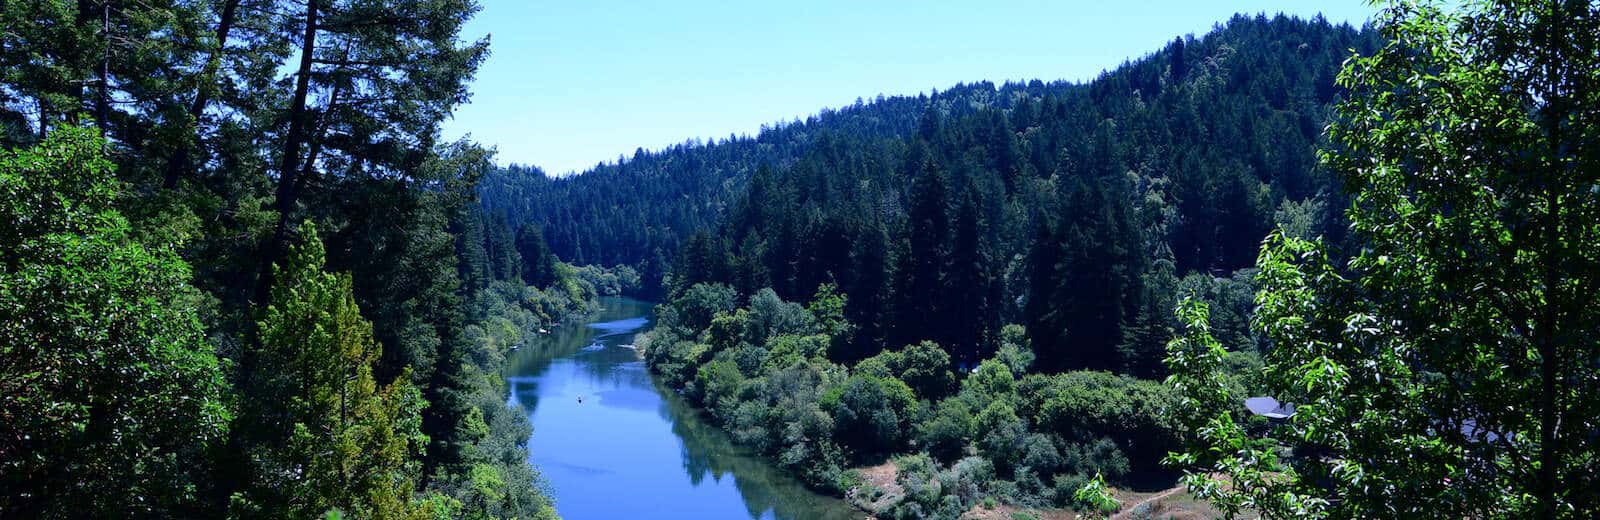 Of The Russian River 4